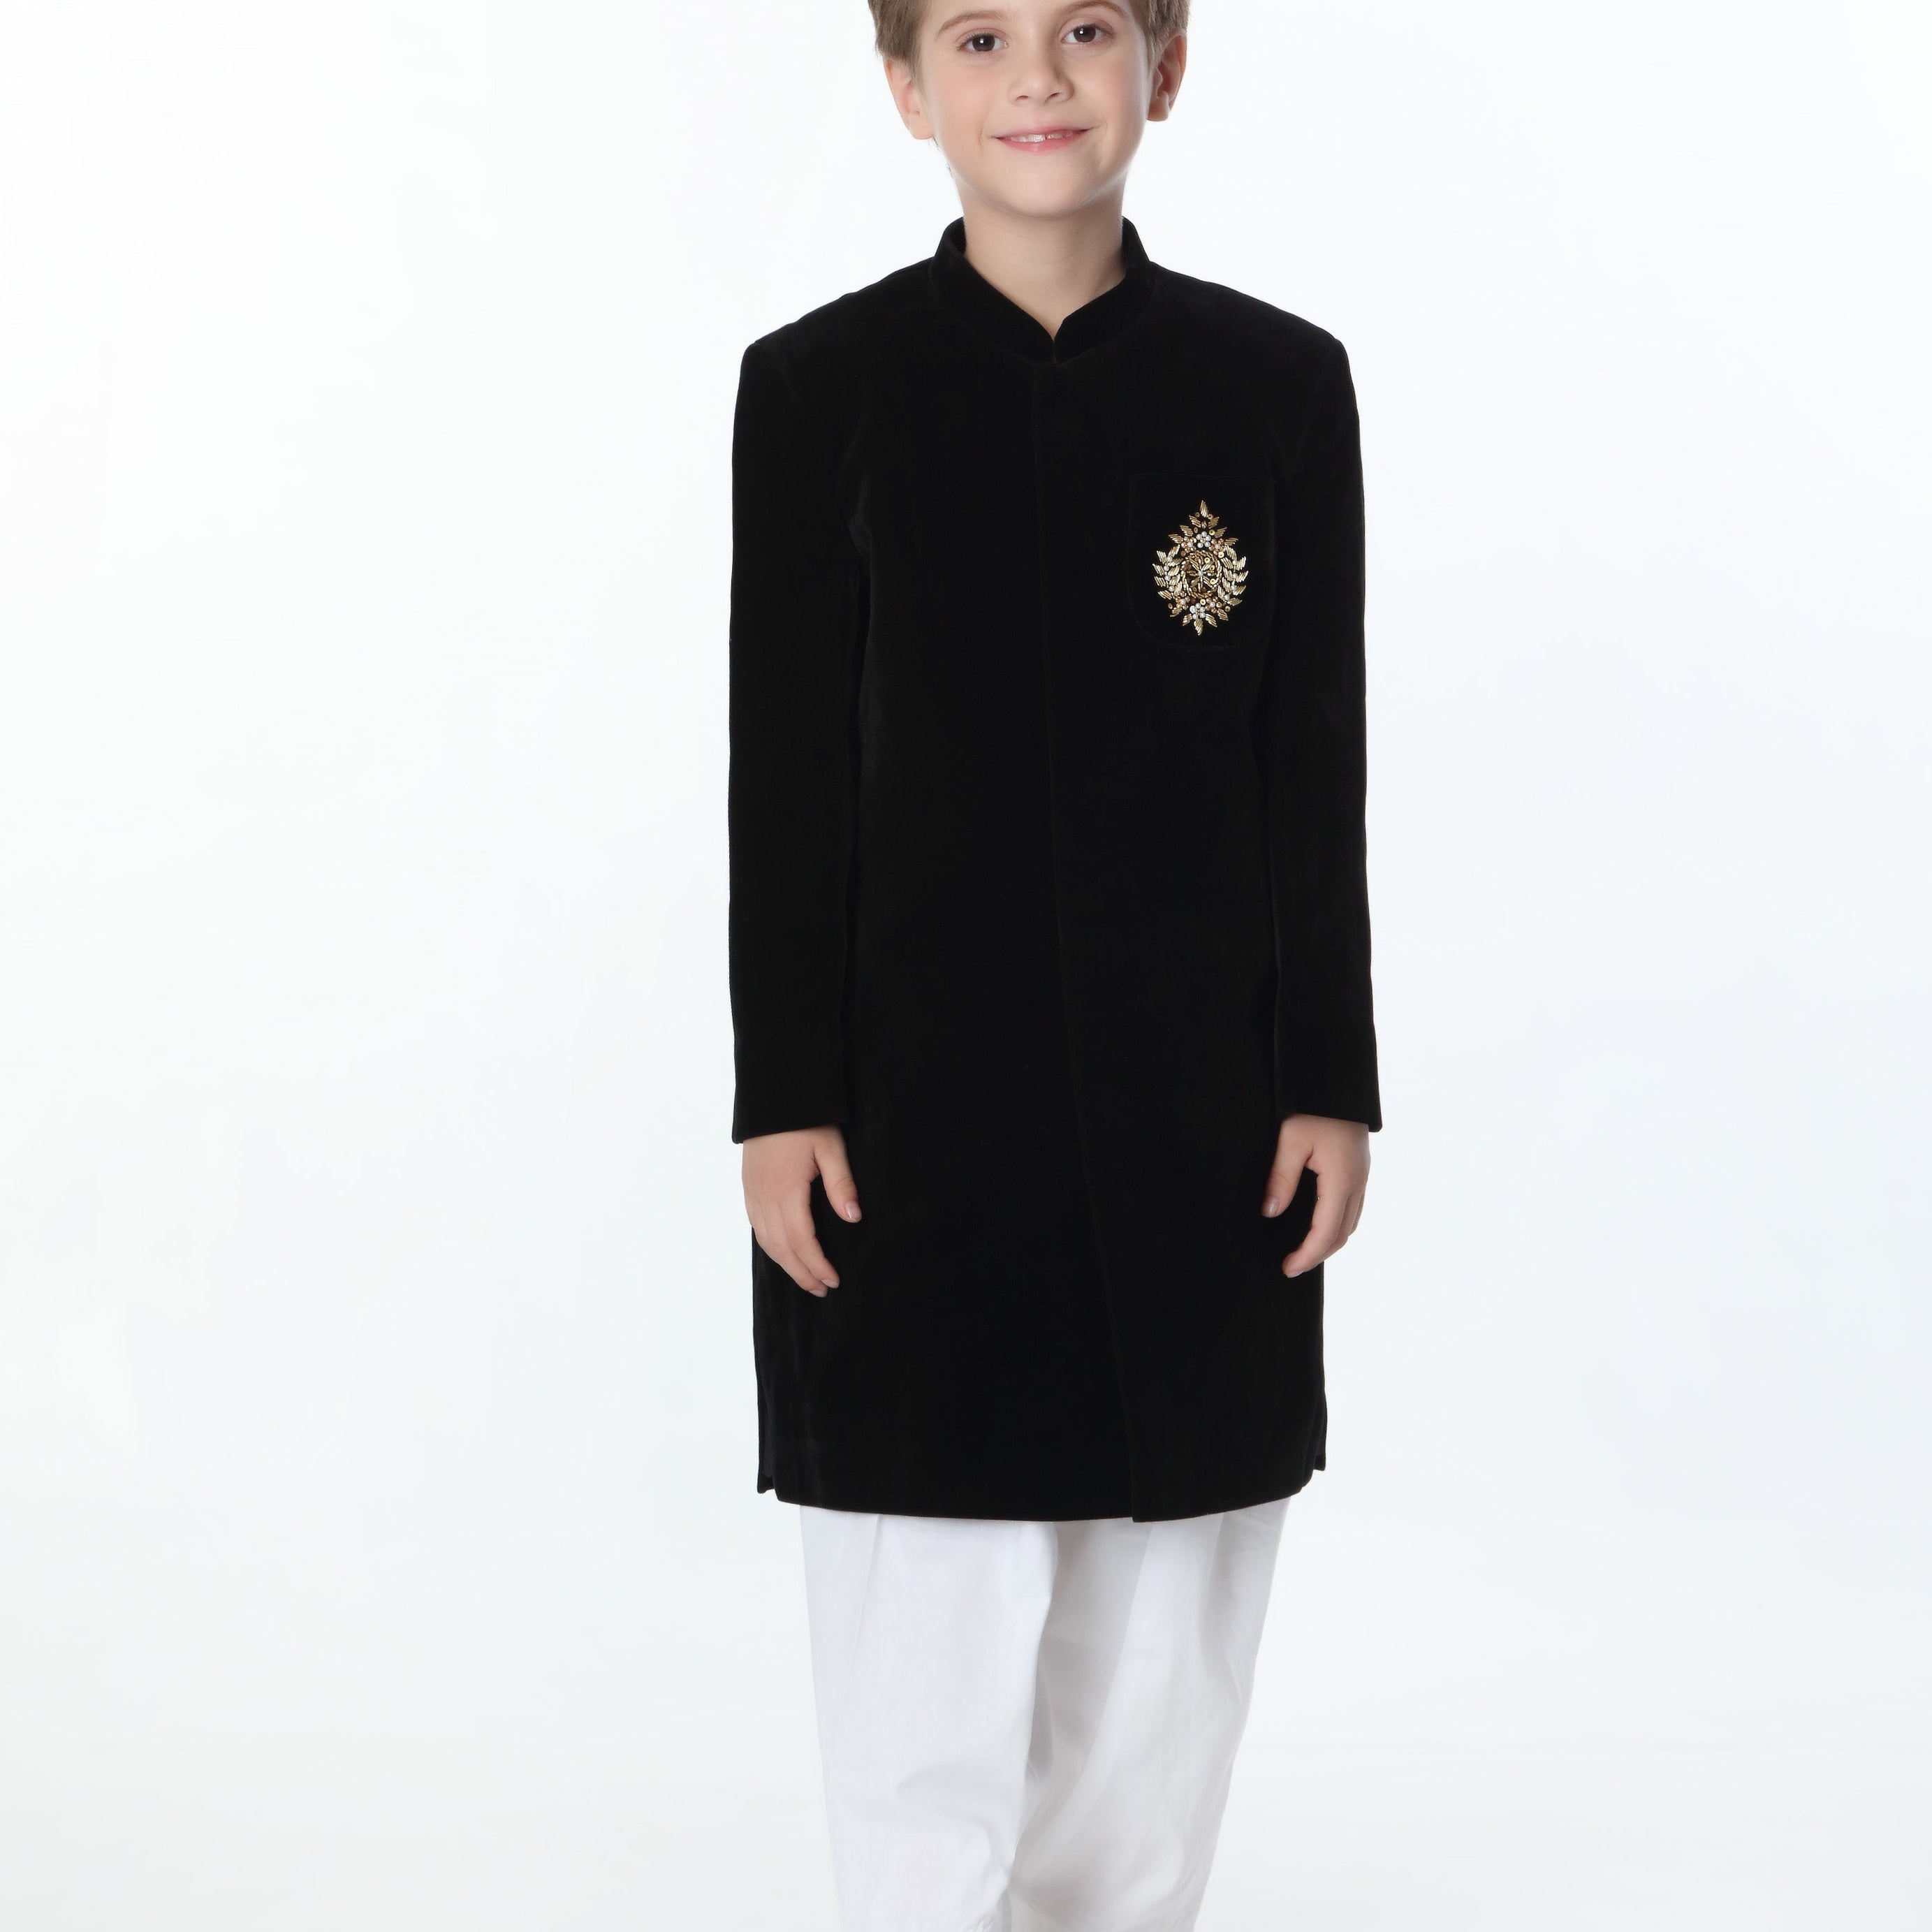 Elevate Your Child's Style with Trendy Black Kids Sherwani - Buy Online Today!